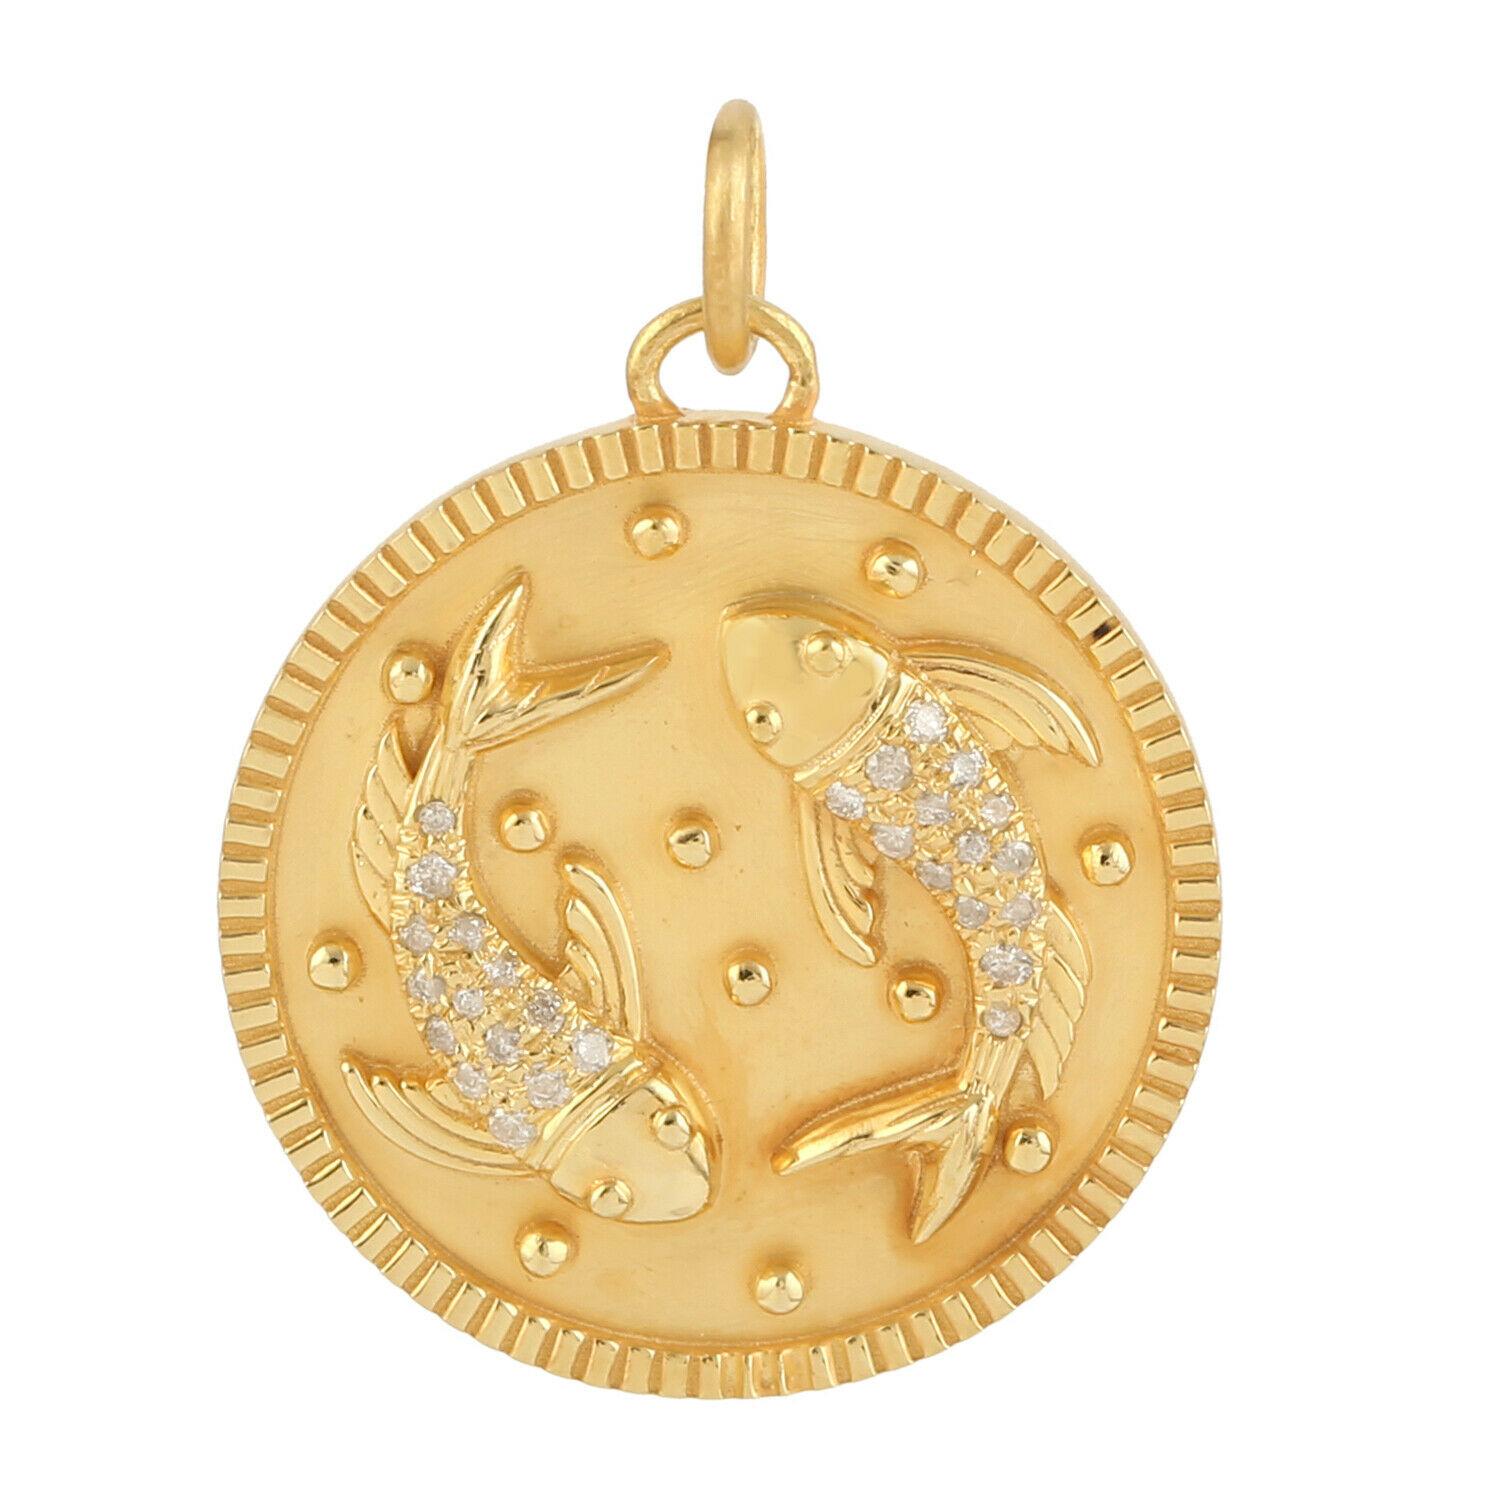 The 14 karat gold pendant is hand set with .15 carats of sparkling diamonds. See matching Zodiac rings and other Zodiac Charm Collection.

FOLLOW MEGHNA JEWELS storefront to view the latest collection & exclusive pieces. Meghna Jewels is proudly